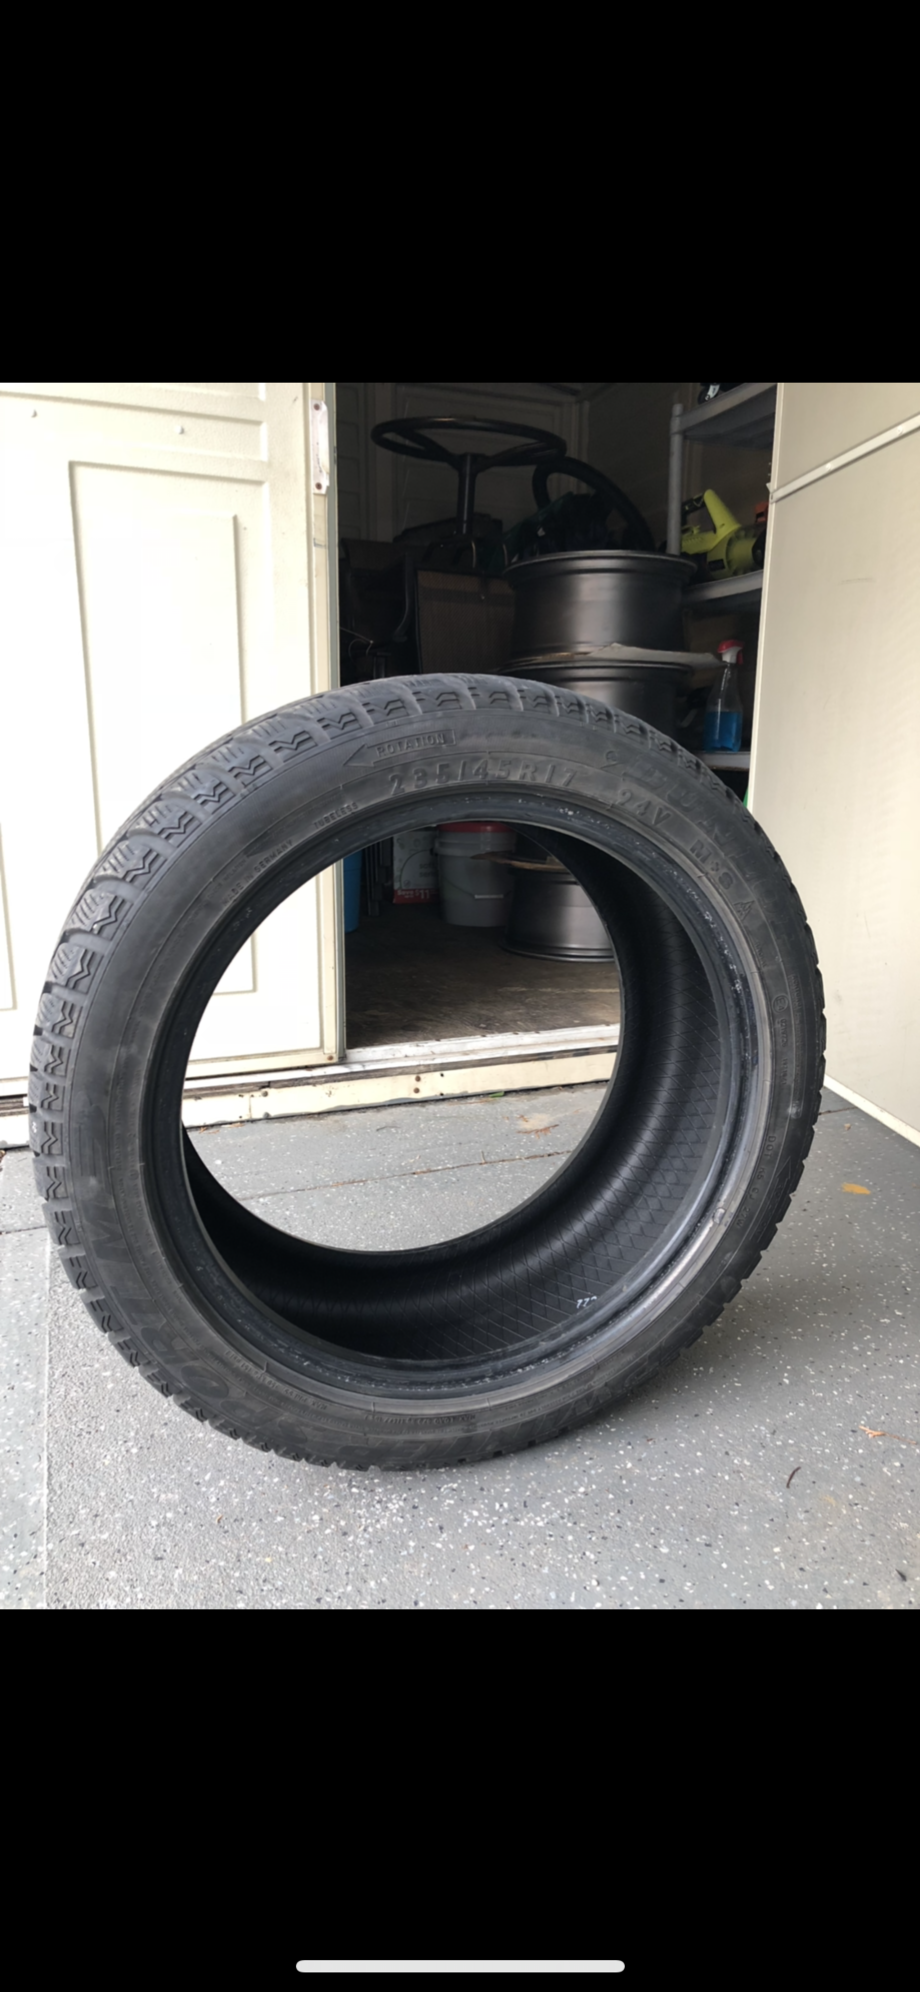 Wheels and Tires/Axles - Dunlop Snow Tires - Used - All Years Any Make All Models - Middle Village, NY 11379, United States